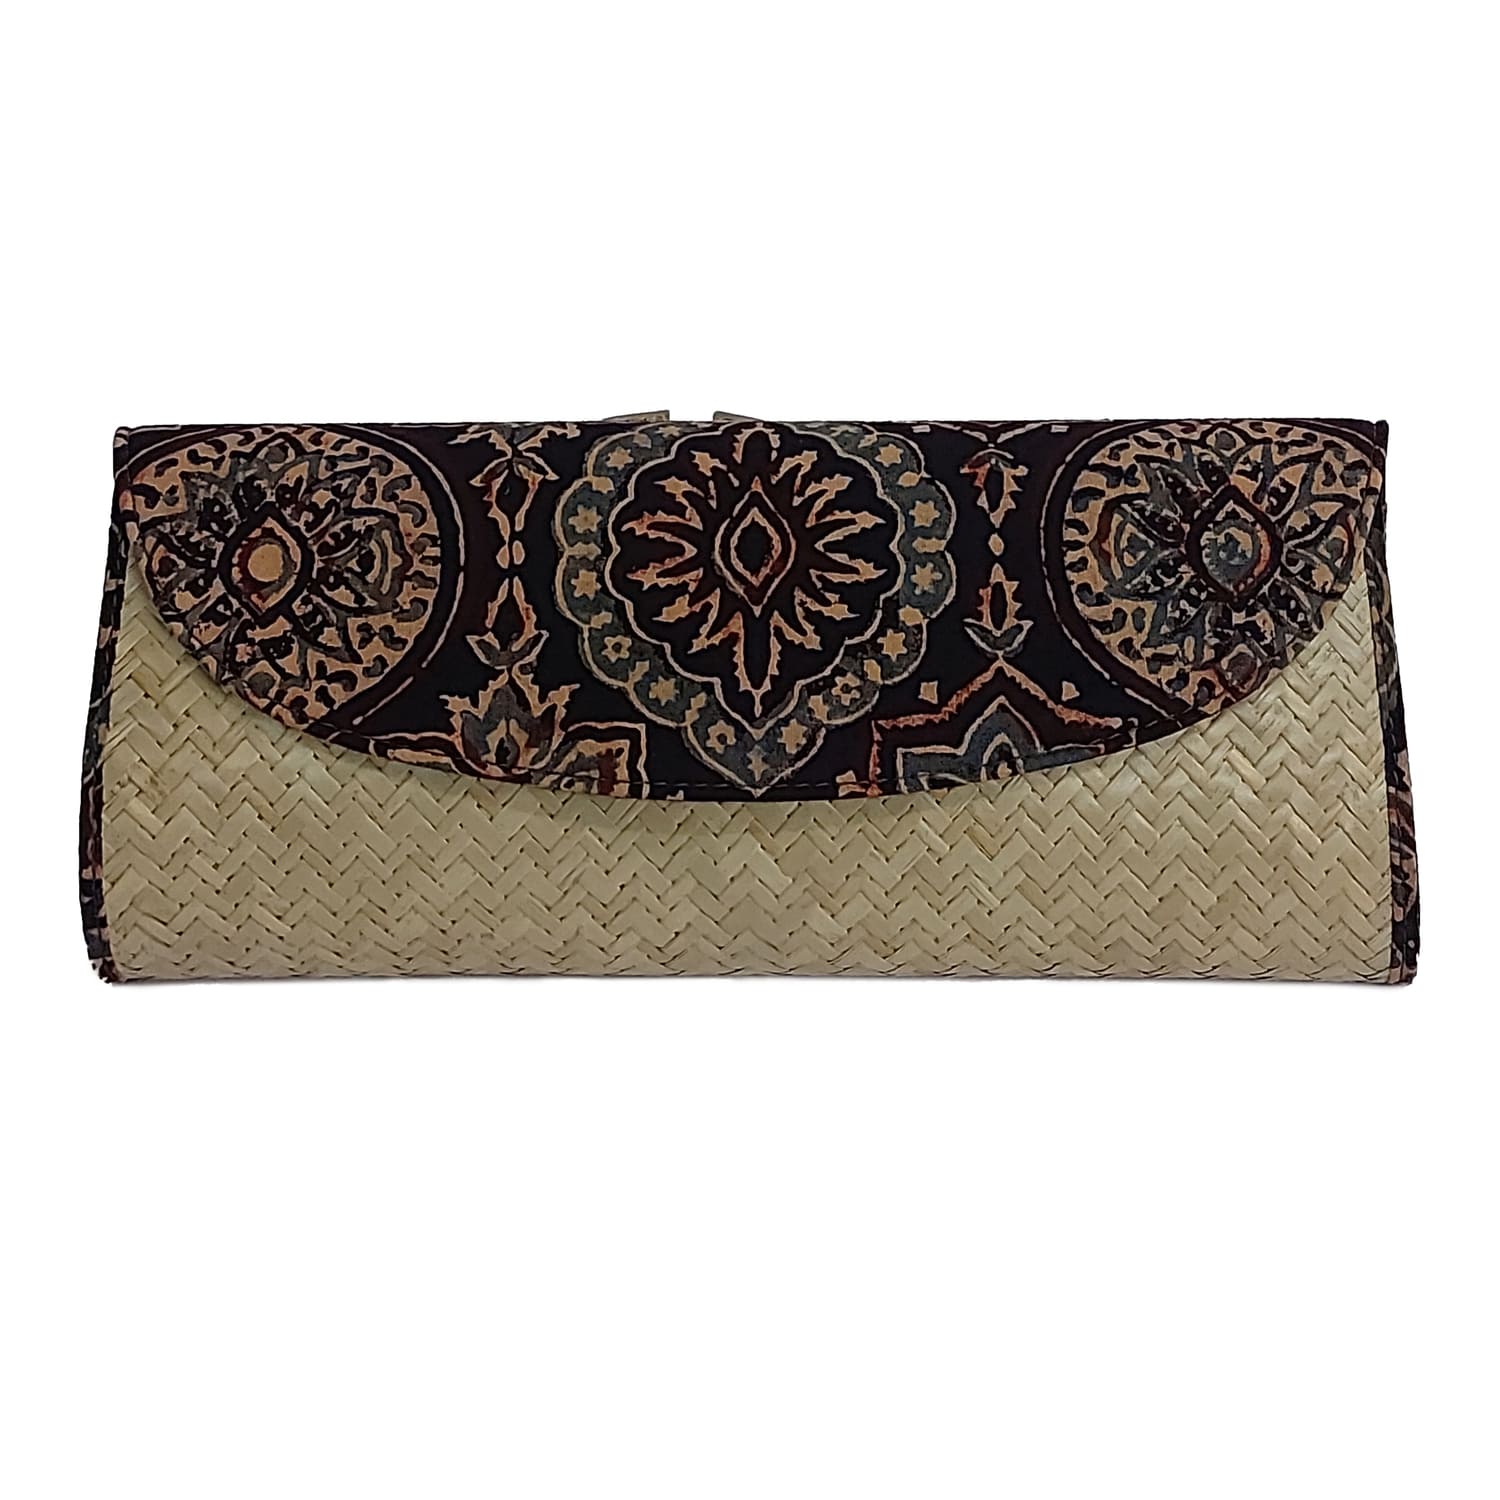 Cotton Fabric Handicraft Embroidery Box Clutch Purse at Best Price in  Ahmedabad | Param Handicrafts